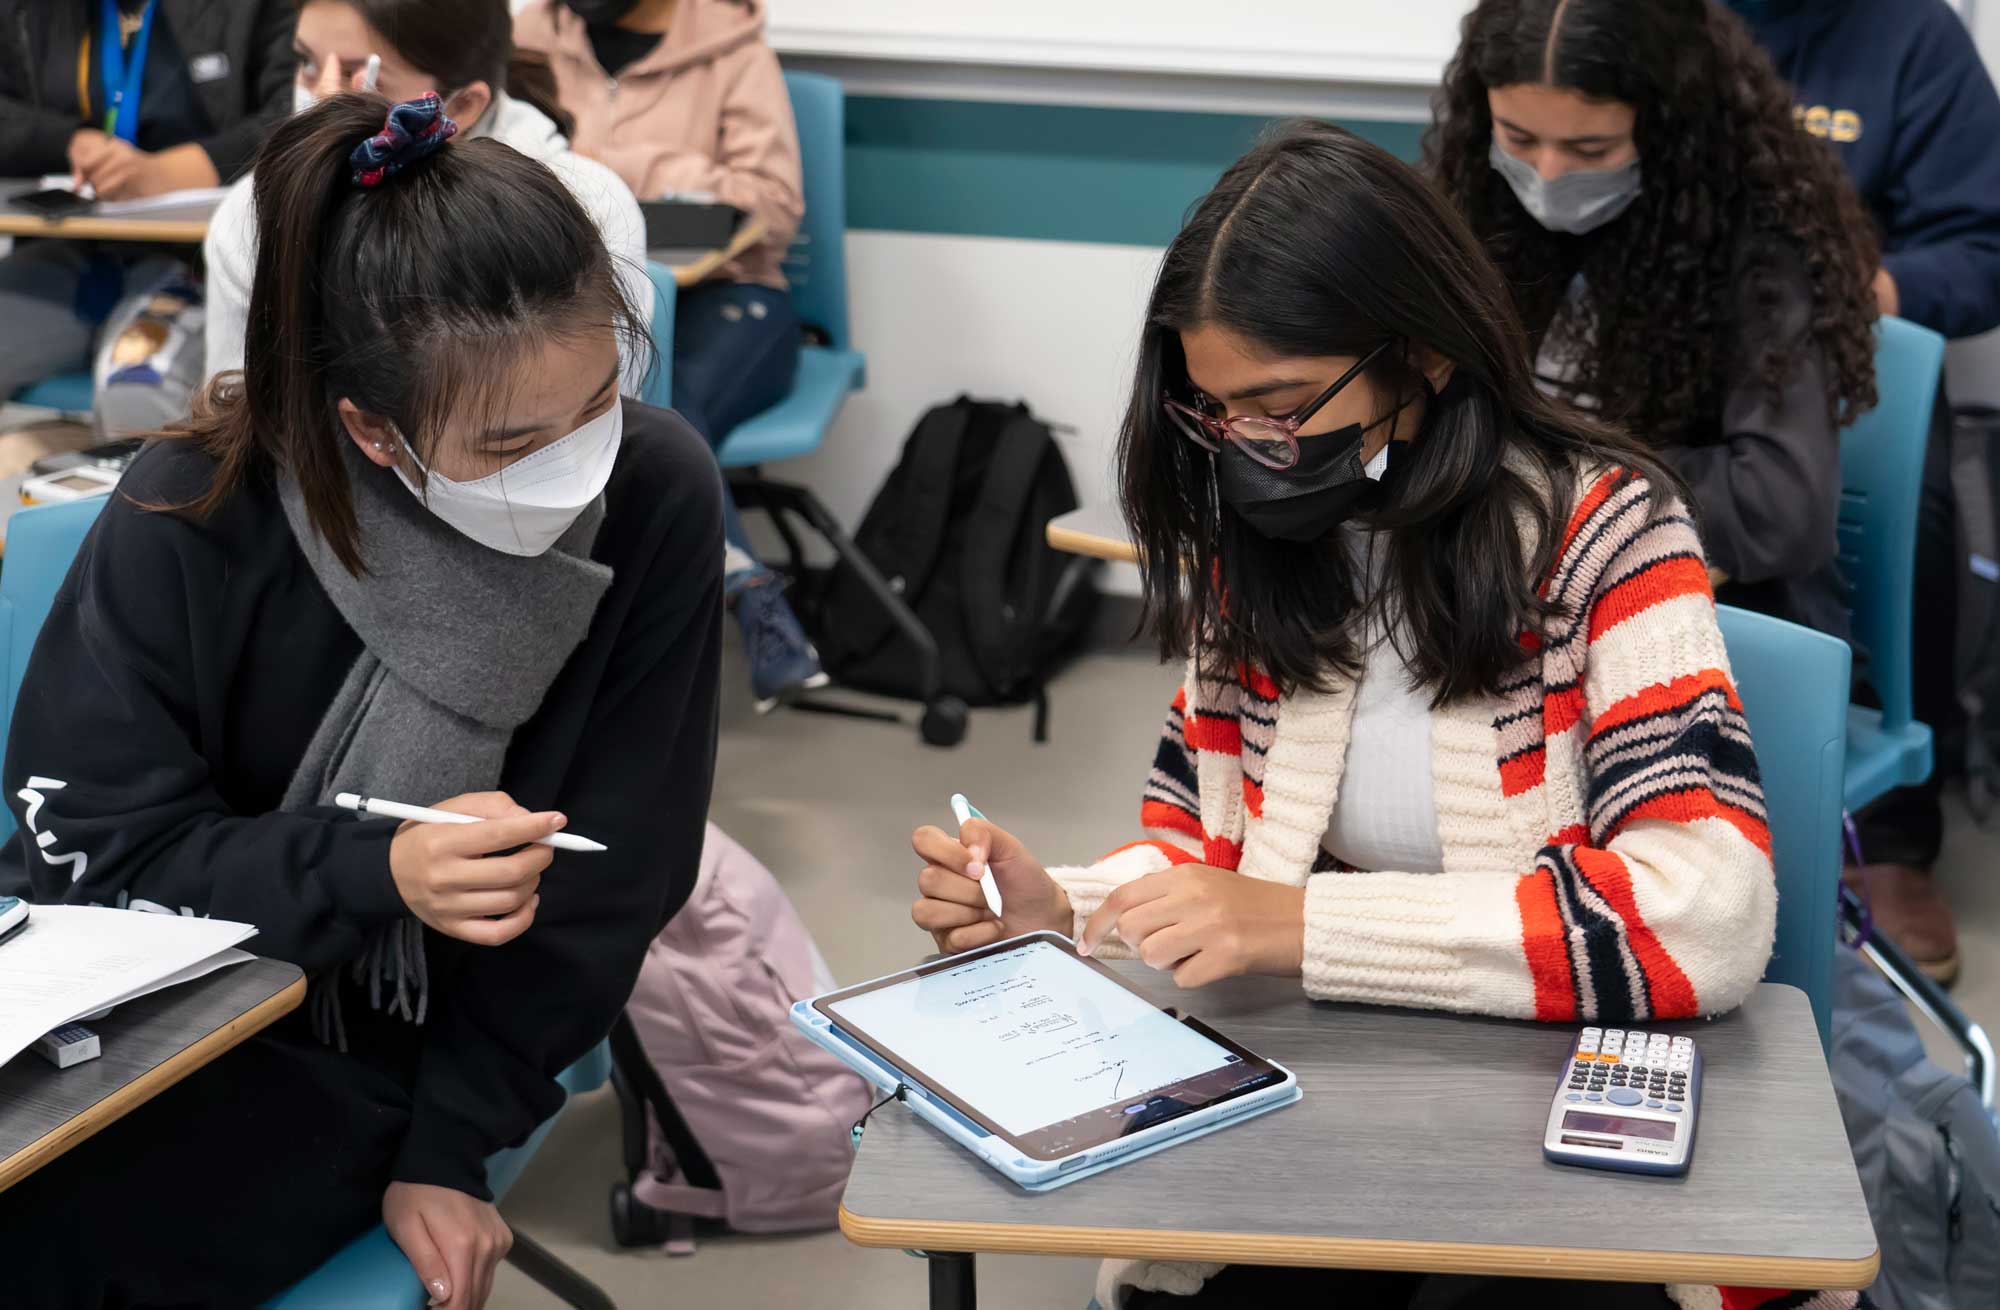 Students Mamta Rajput and Xiaoyi Yuan study together on a tablet during a chemistry class created to address the barriers and opportunity gaps faced by students historically excluded from STEM.